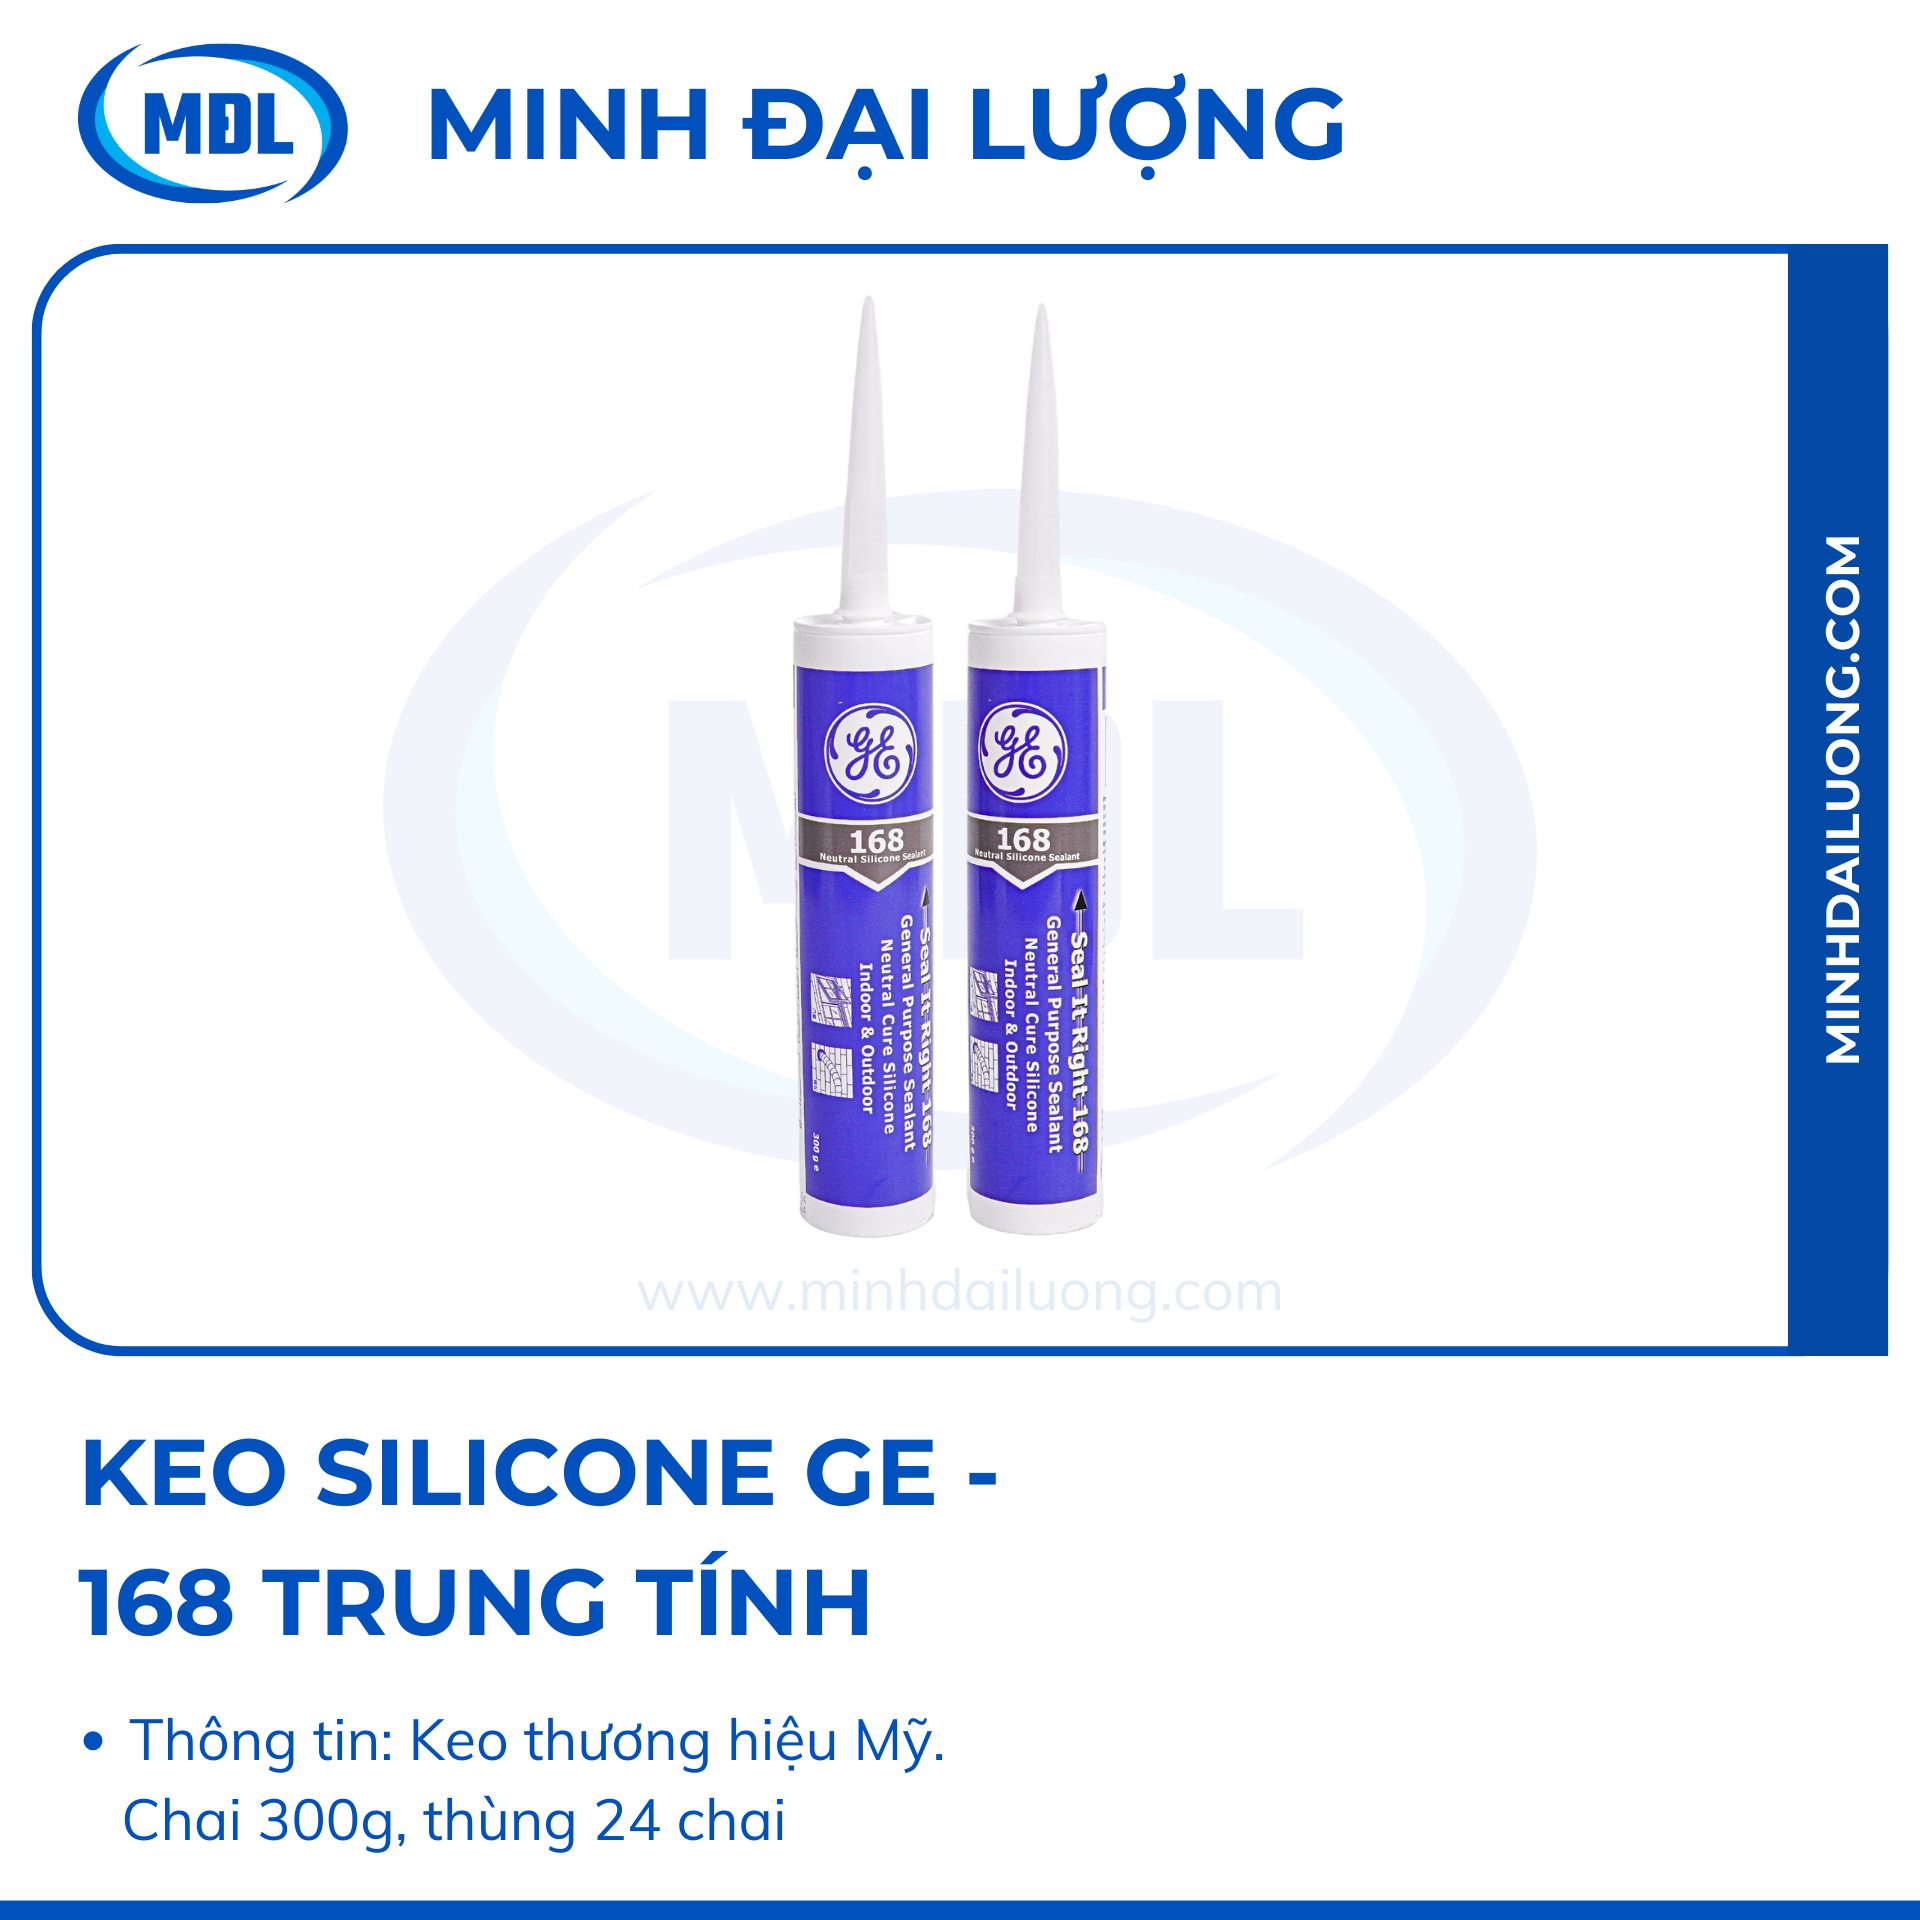 Keo silicone GE 168 trung tính